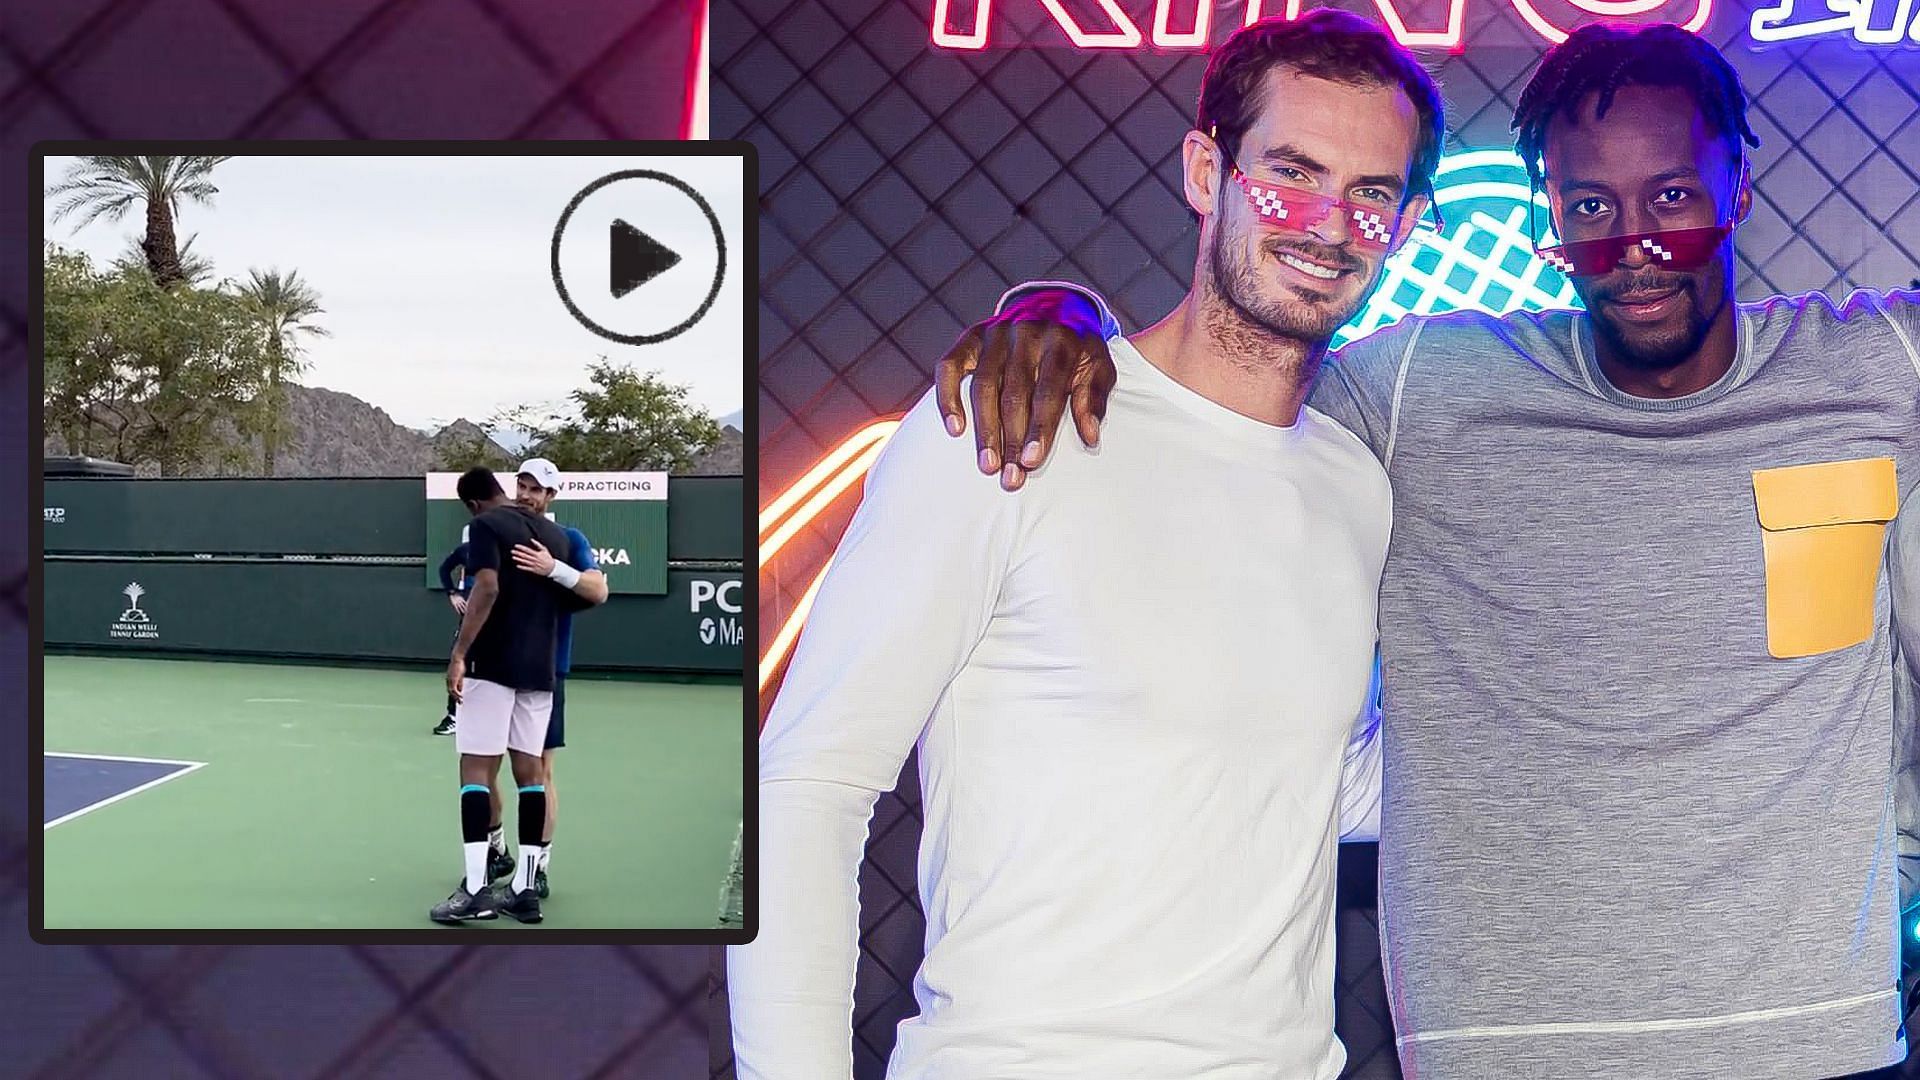 Andy Murray and Gael Monfils reunite at Indian Wells 2023